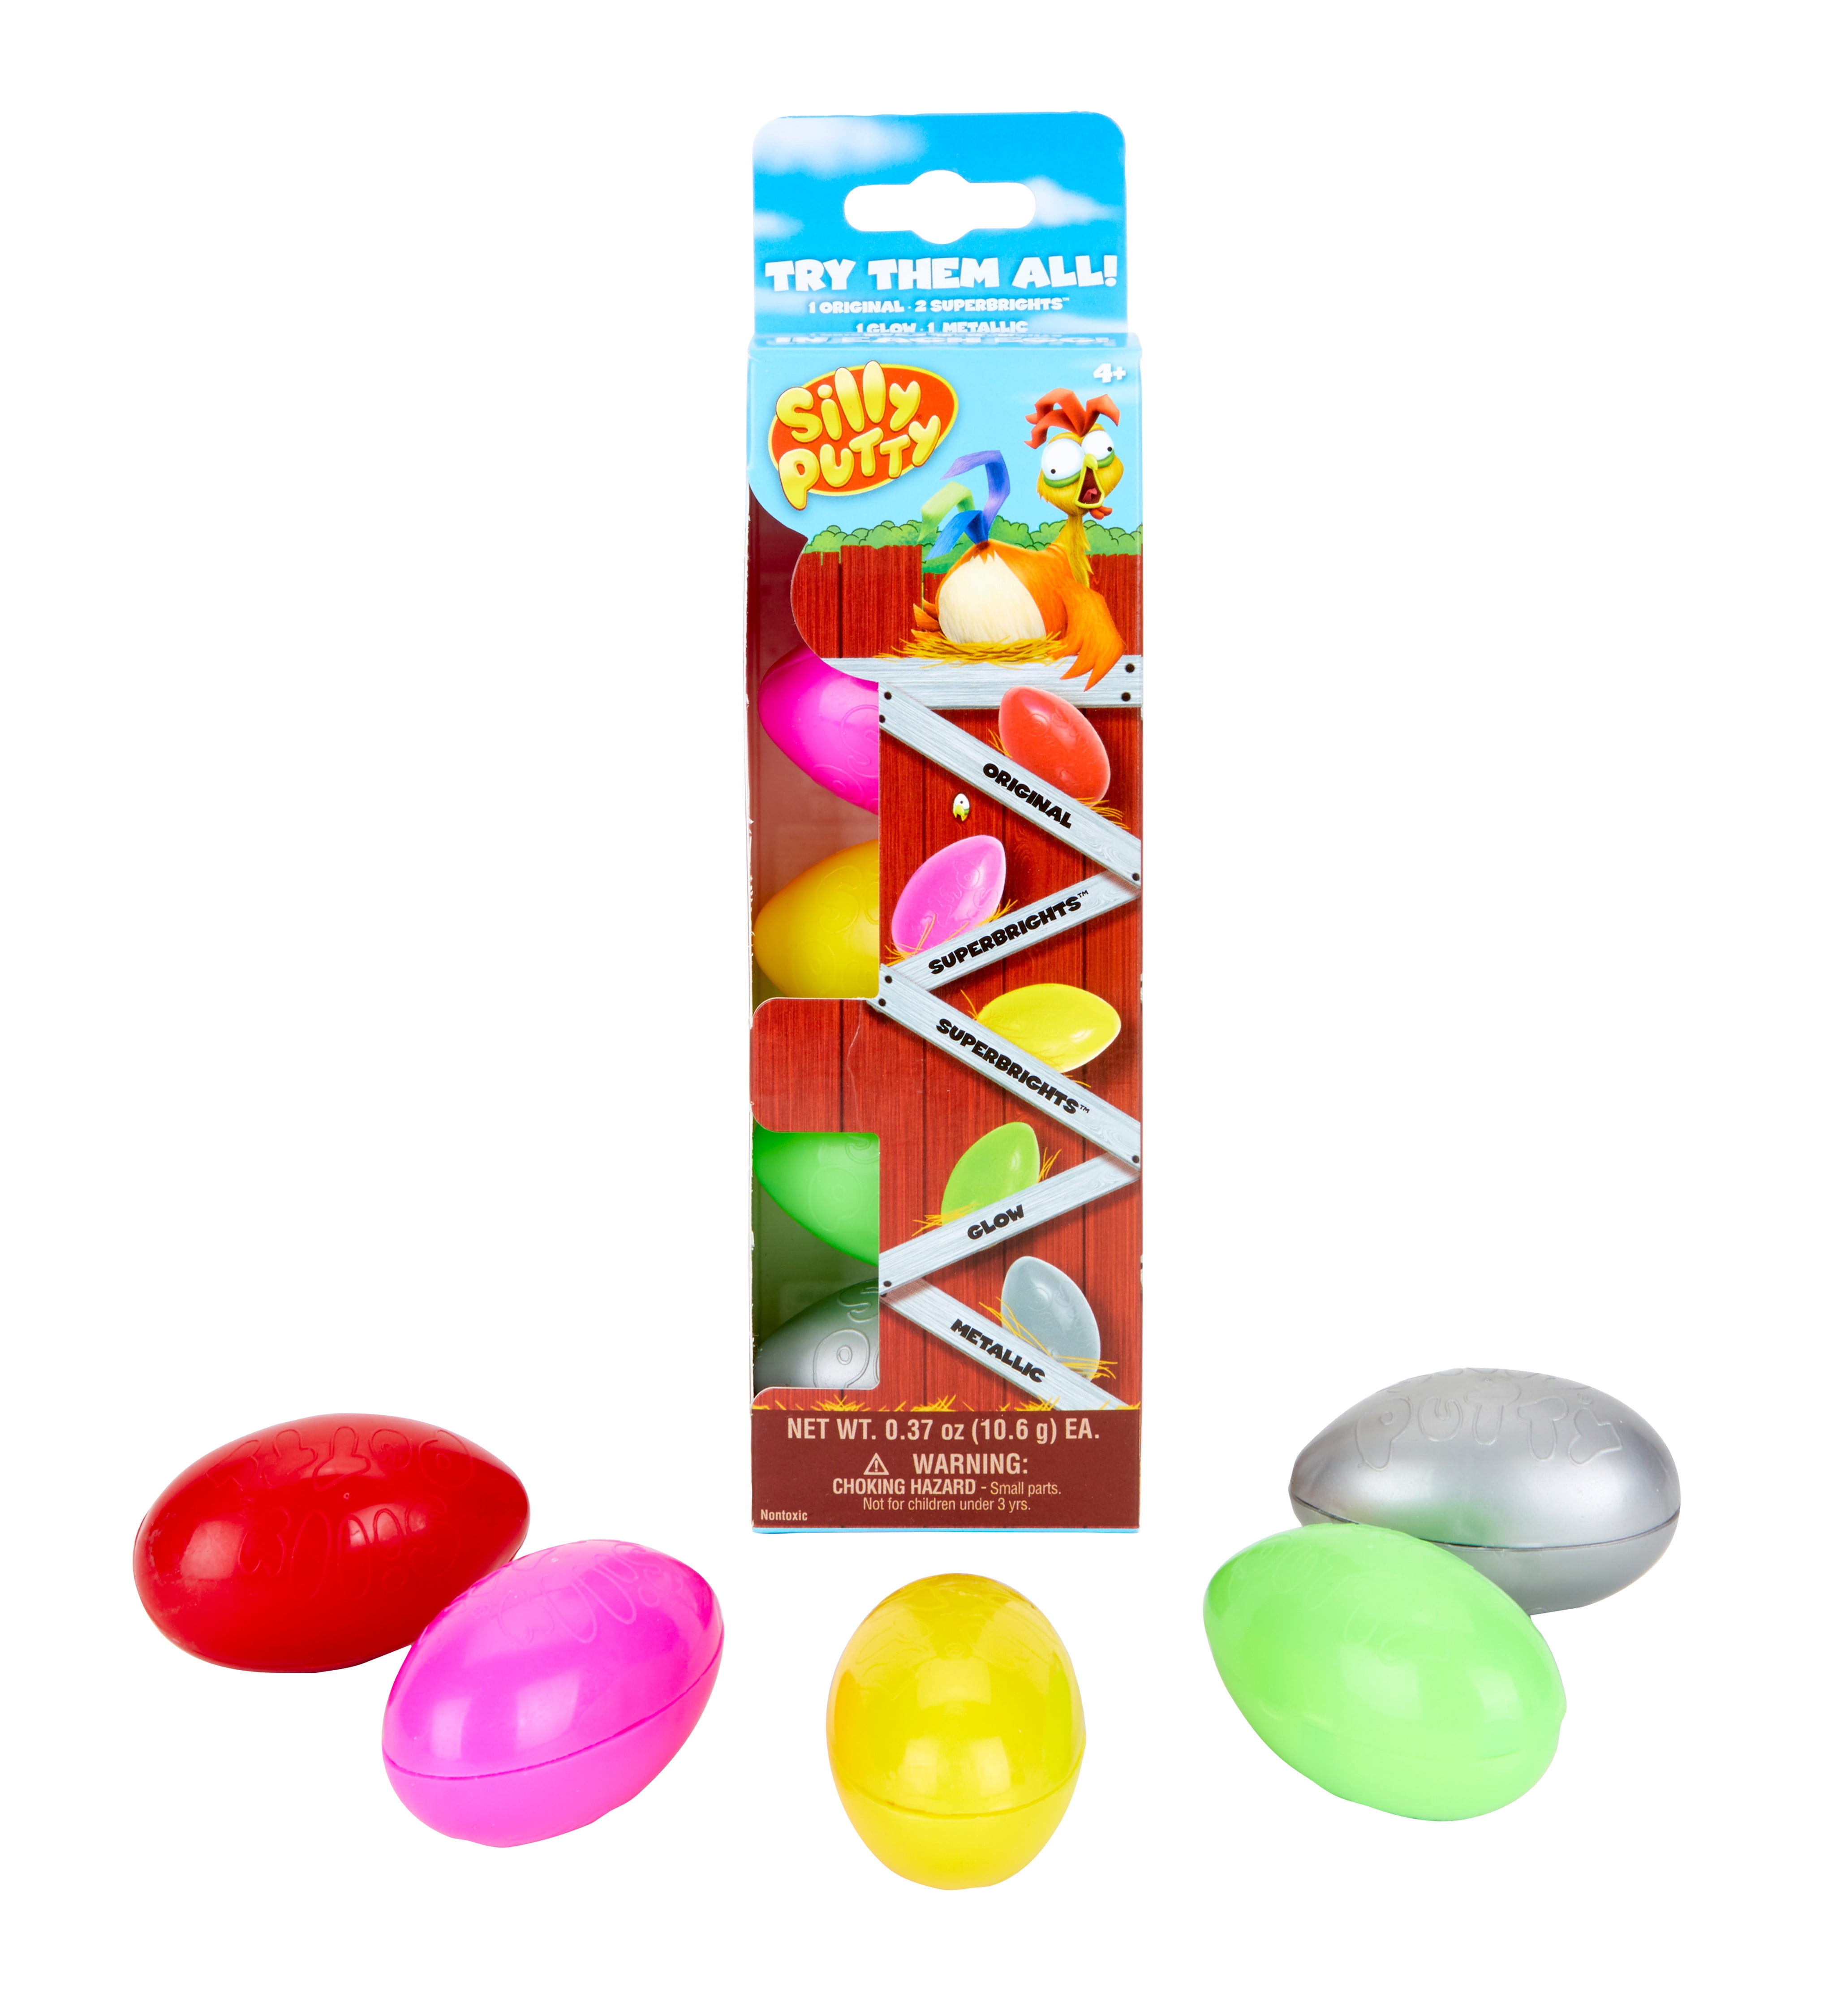 3 Crayola Silly Putty Super Bright Colors 08-0315 for sale online 